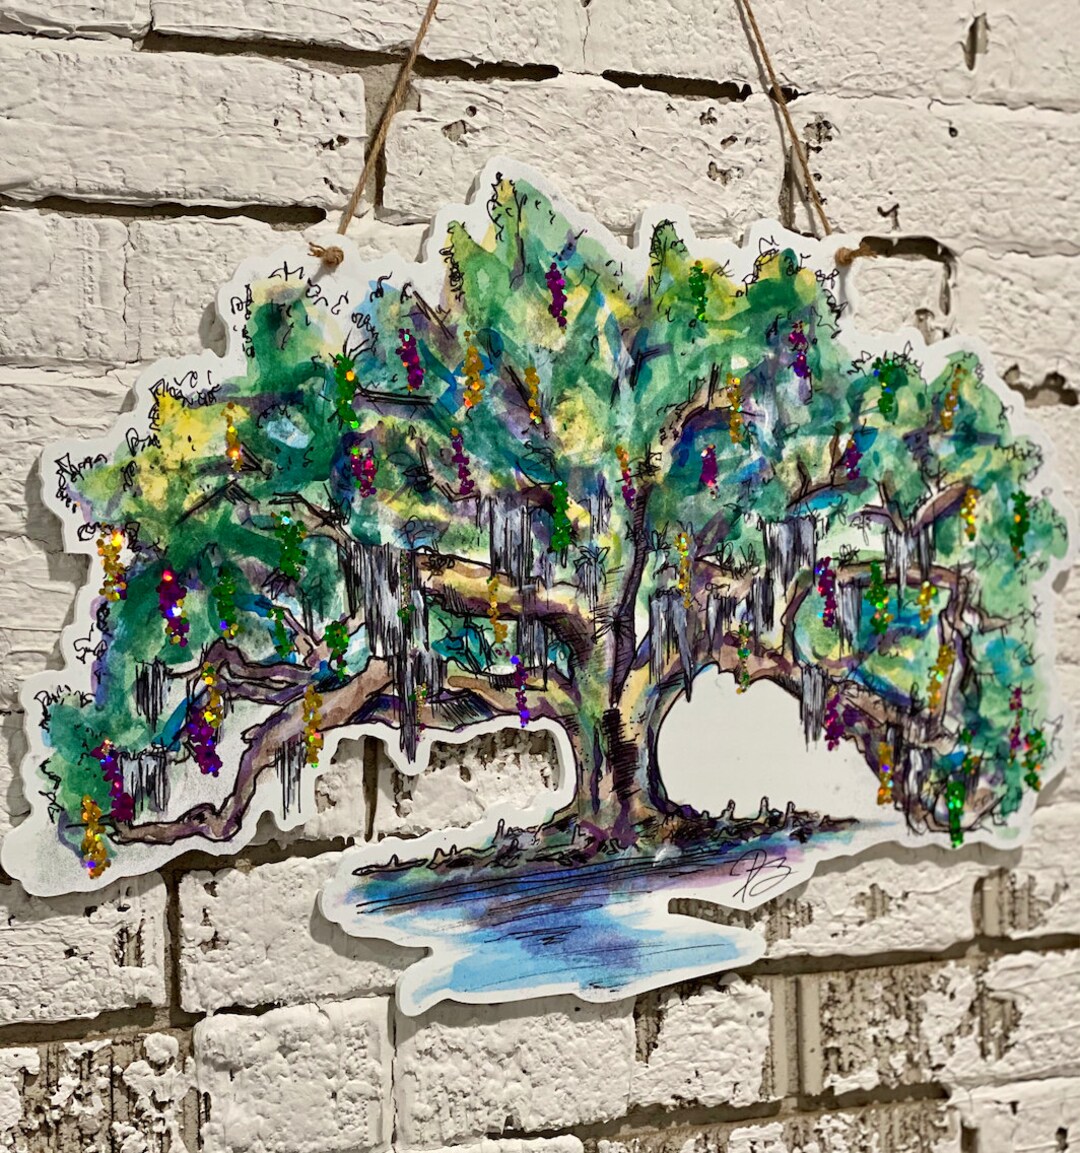 Mardi Gras Tree - watercolor Art Print for Sale by jay-p